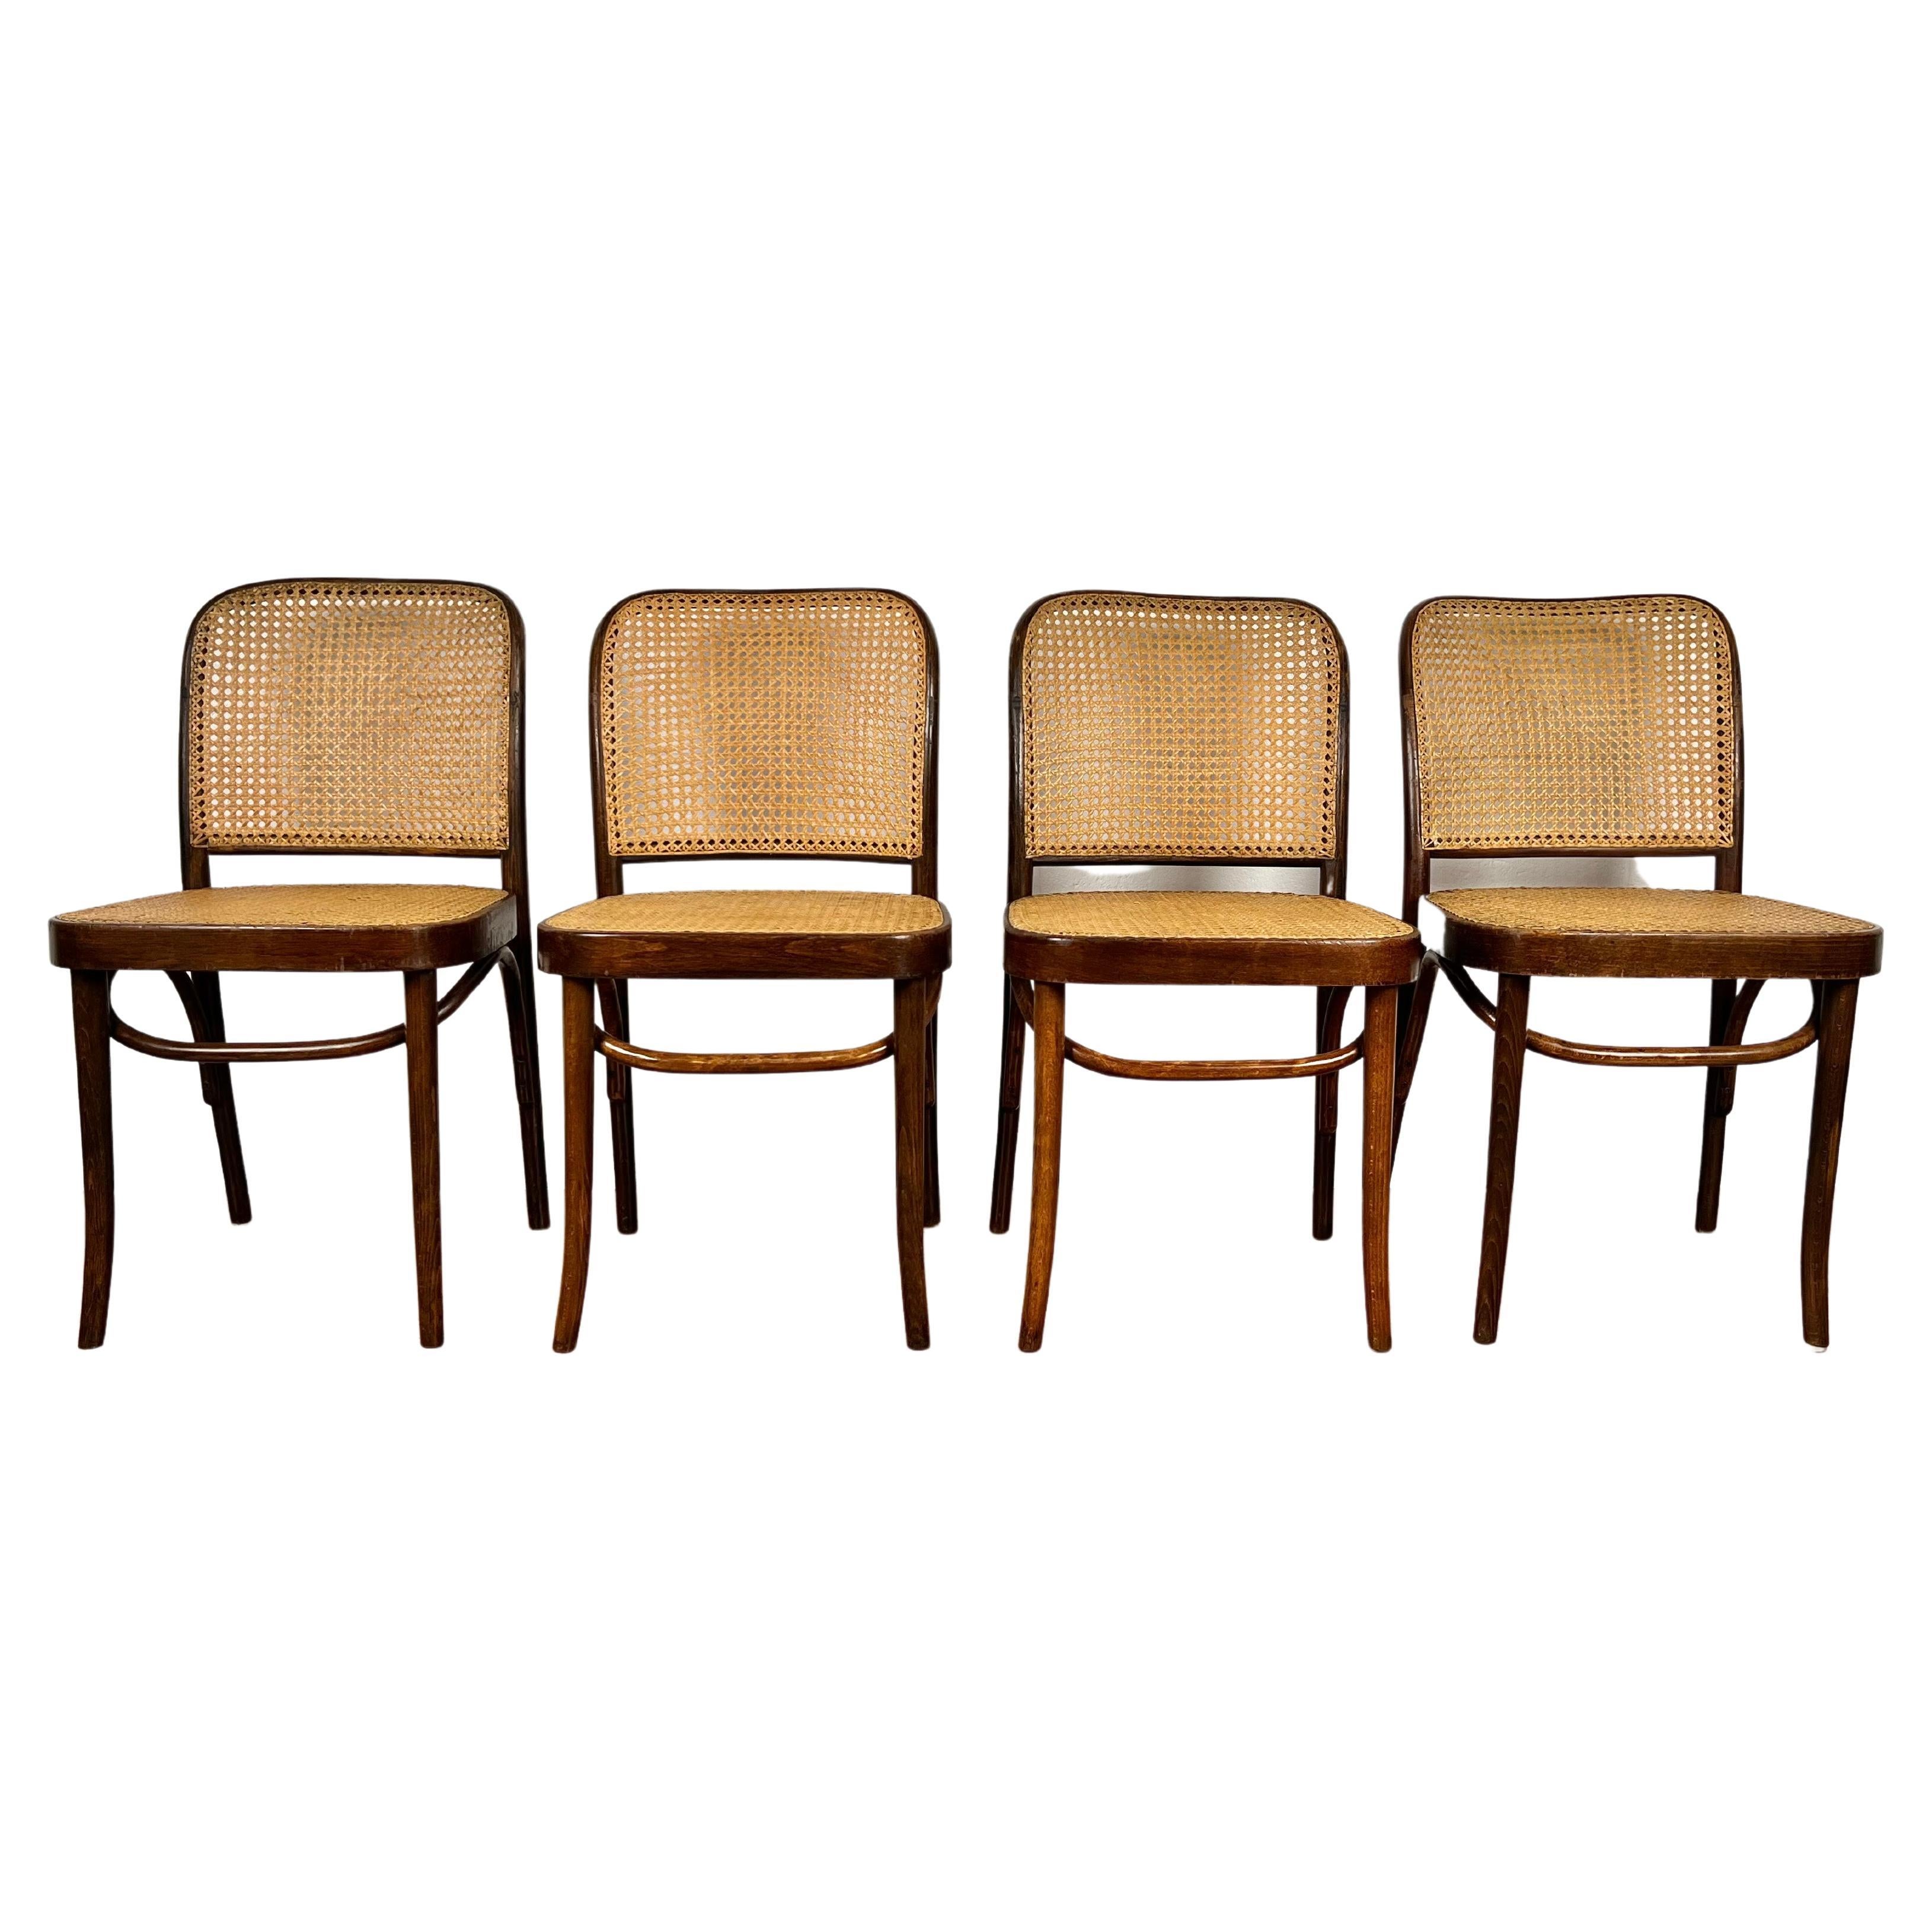 20th century Josef Hoffmann bentwood hand caned FMG Prague chairs made in Poland